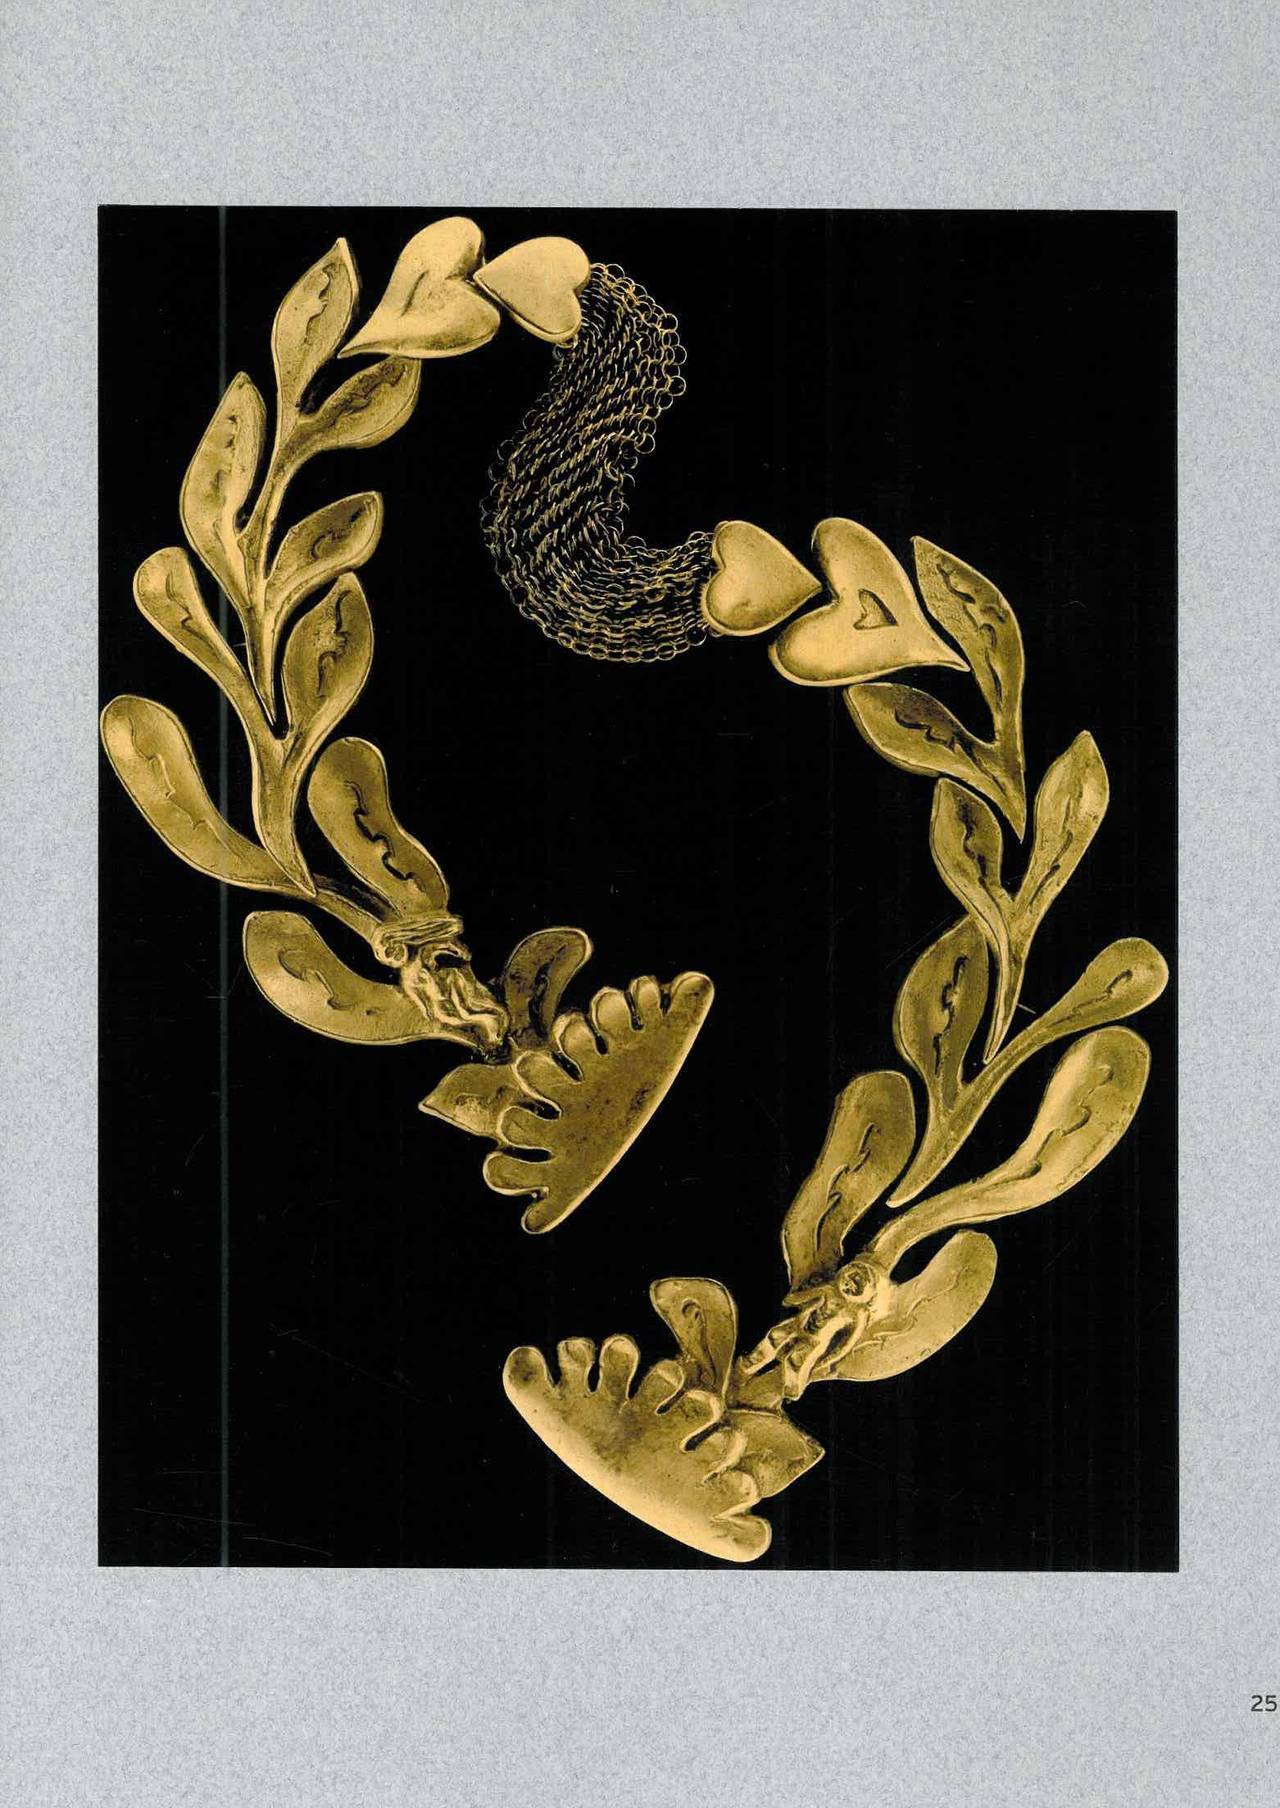 This is a very scarce catalogue of the works of Line Vautrin which were displayed at the Museum fur Kunst und Gewerbe in Hamburg in 2003. It was published in a very small number of 600 only, this being number 345. There are 22 tipped in photographs